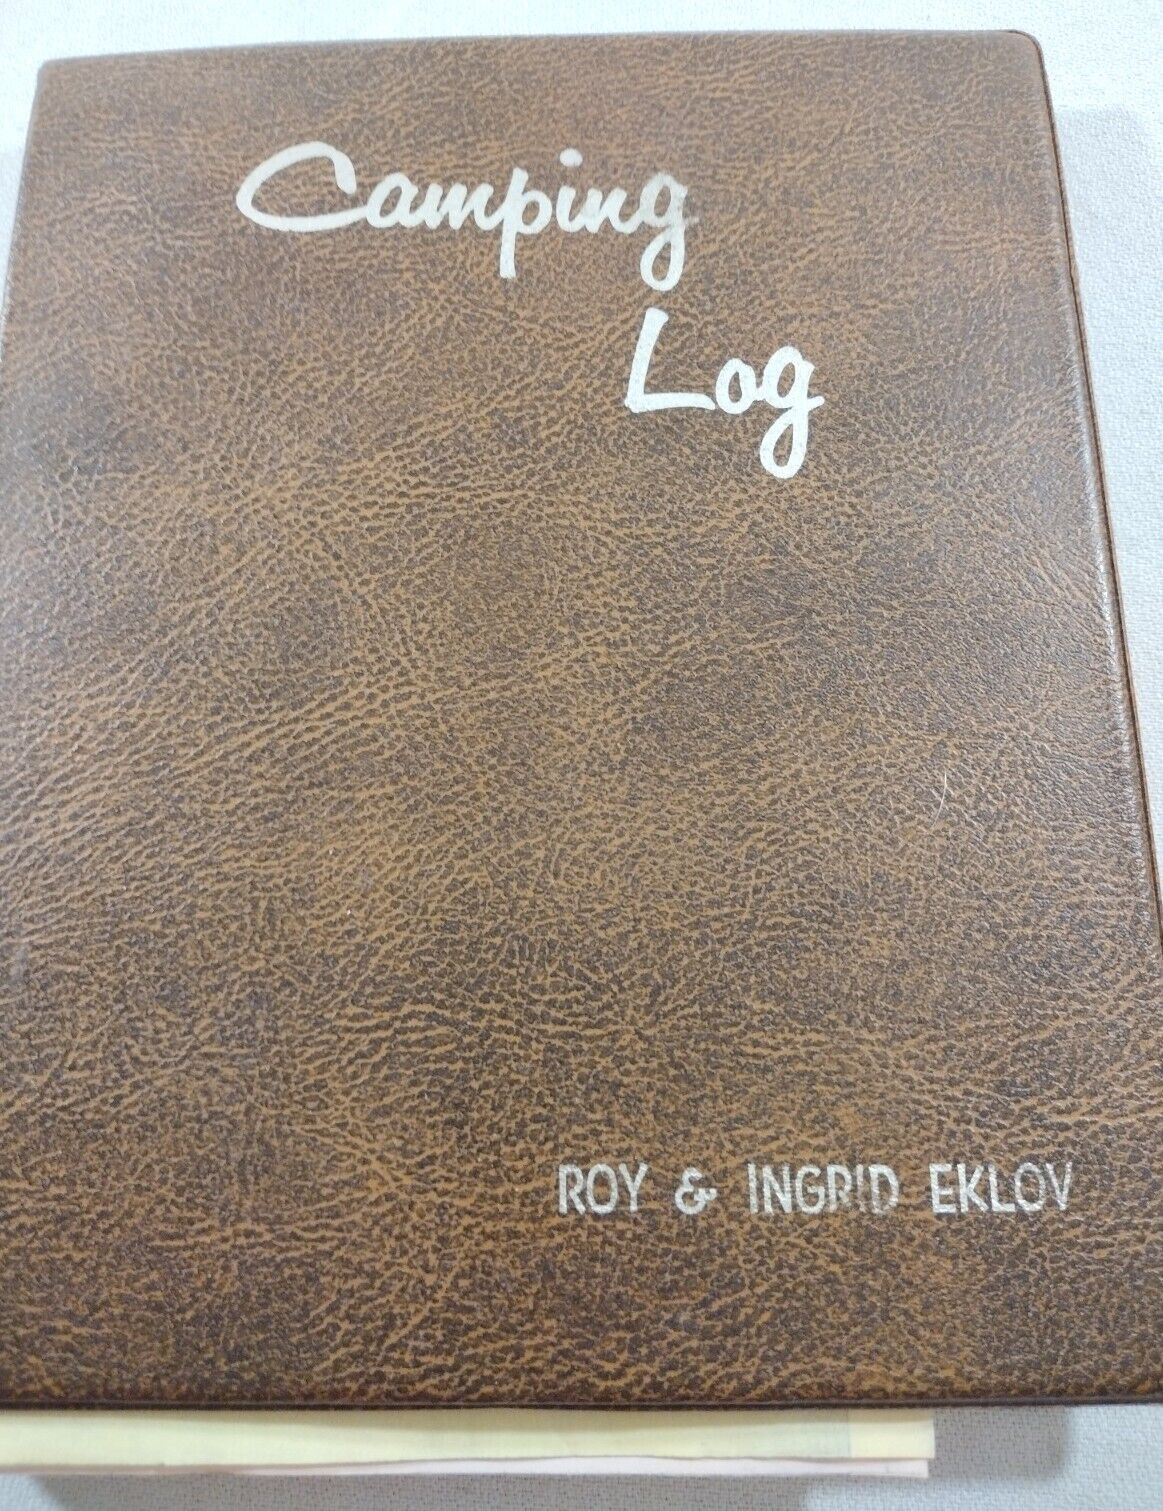 Vintage 1970's-80s Camping Log Record Book Travco Receipts Ephemera Letters MCM